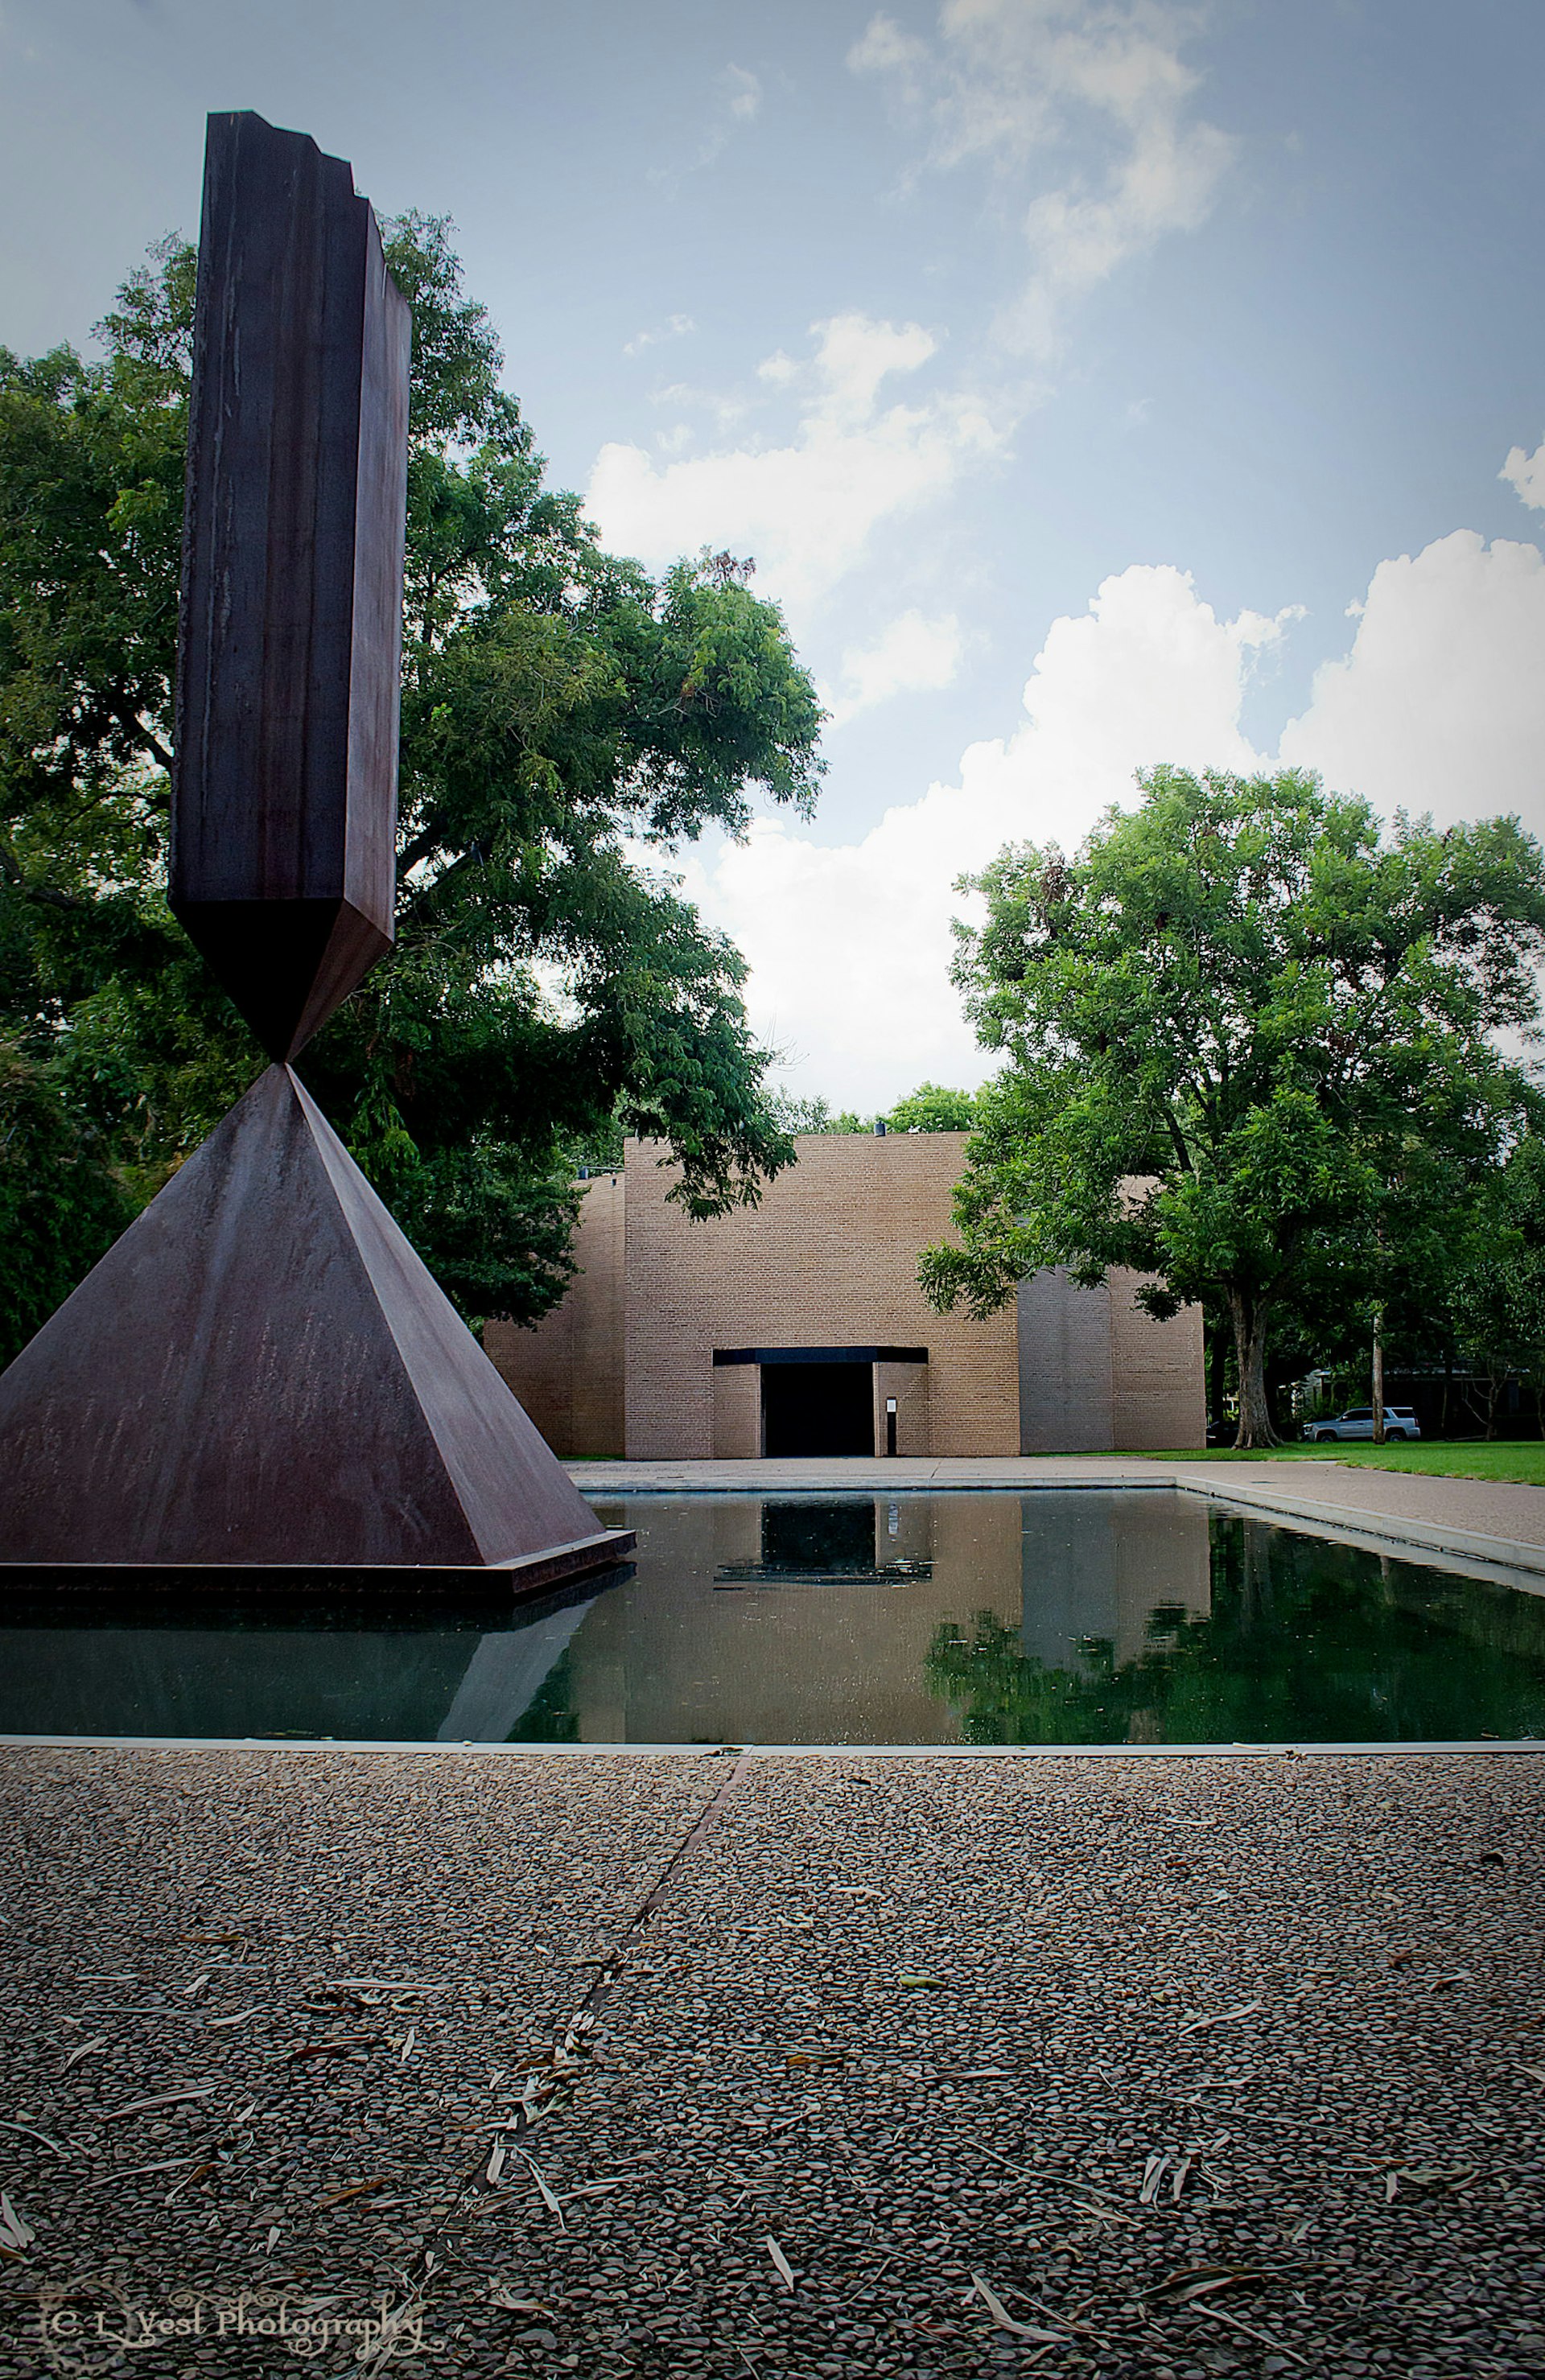 500px Photo ID: 116155939 - The Rothko Chapel in the Museum District of Houston, Texas. Such a peaceful place to be.